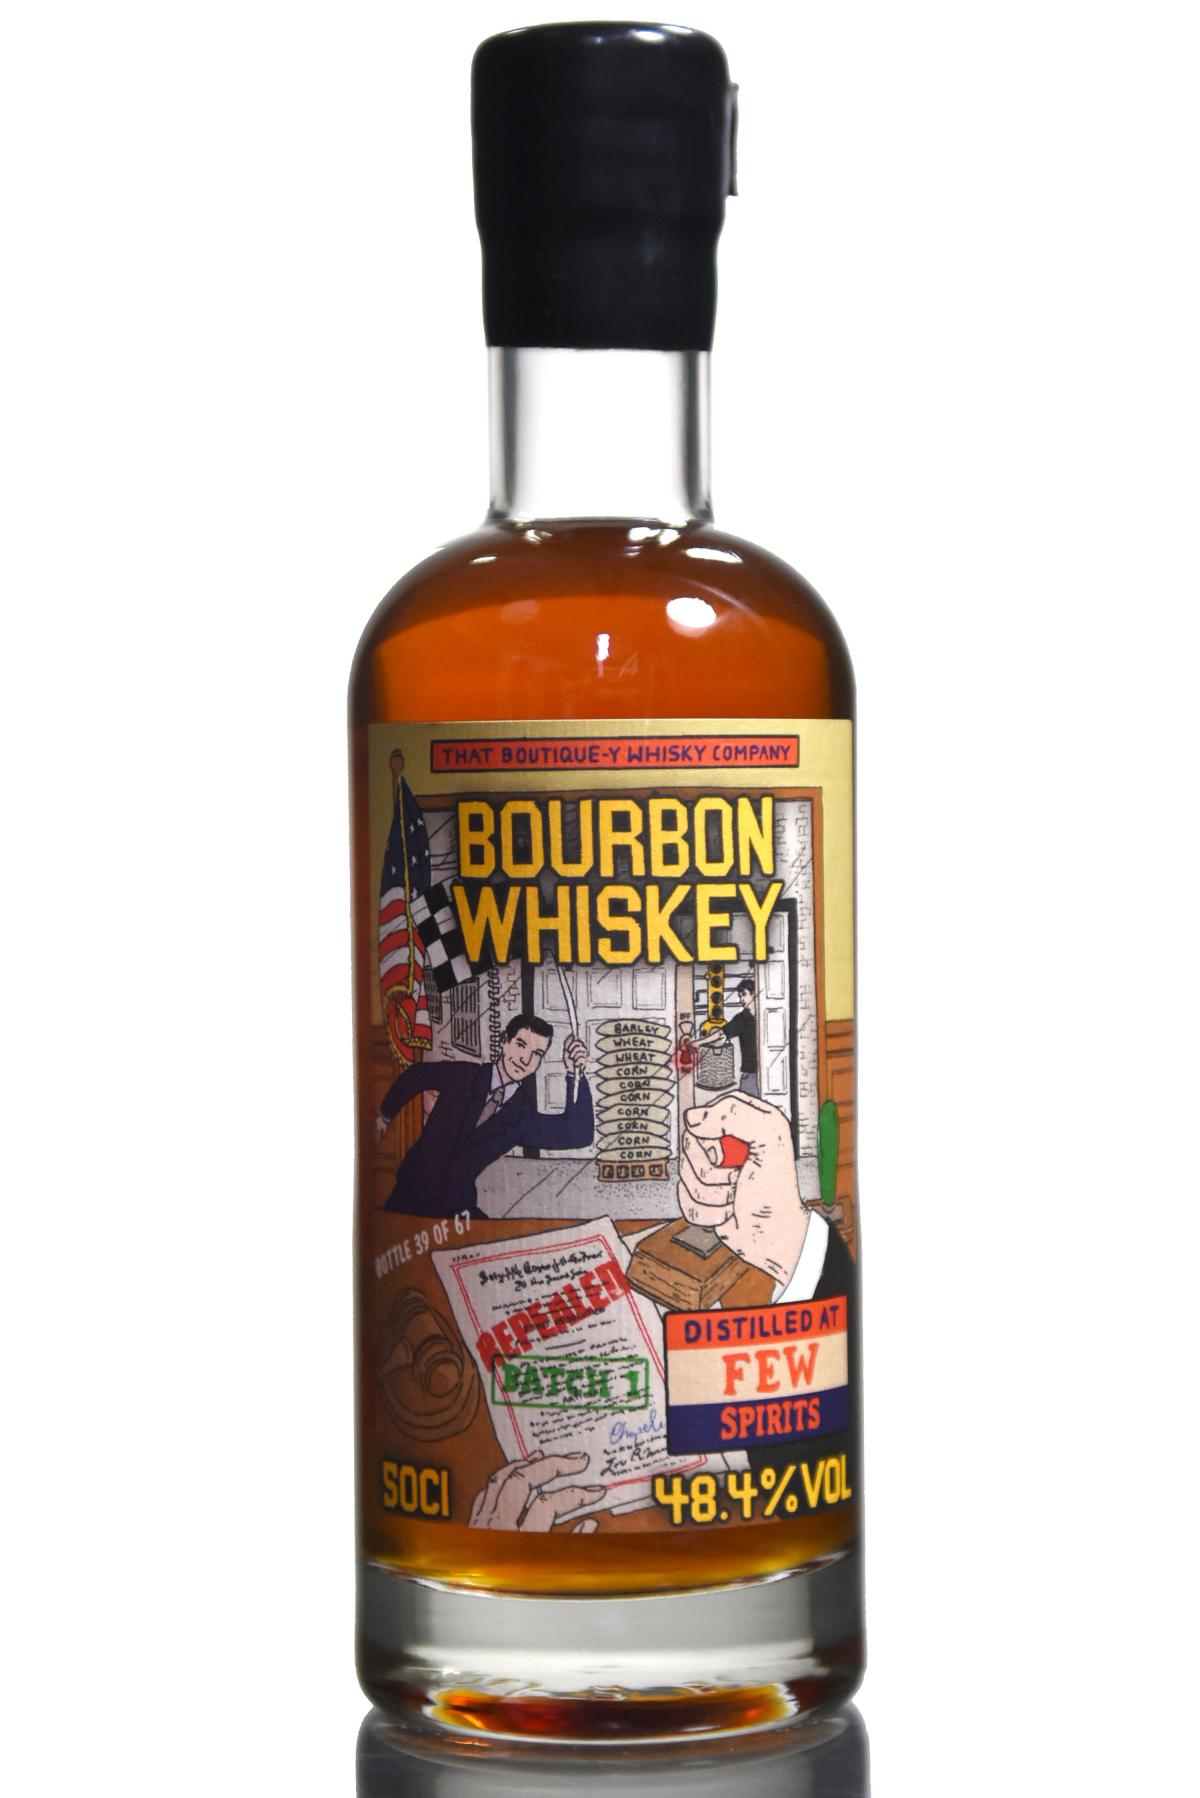 Few Bourbon Batch 1 - That Boutique-y Whisky Company - 67 Bottles Only